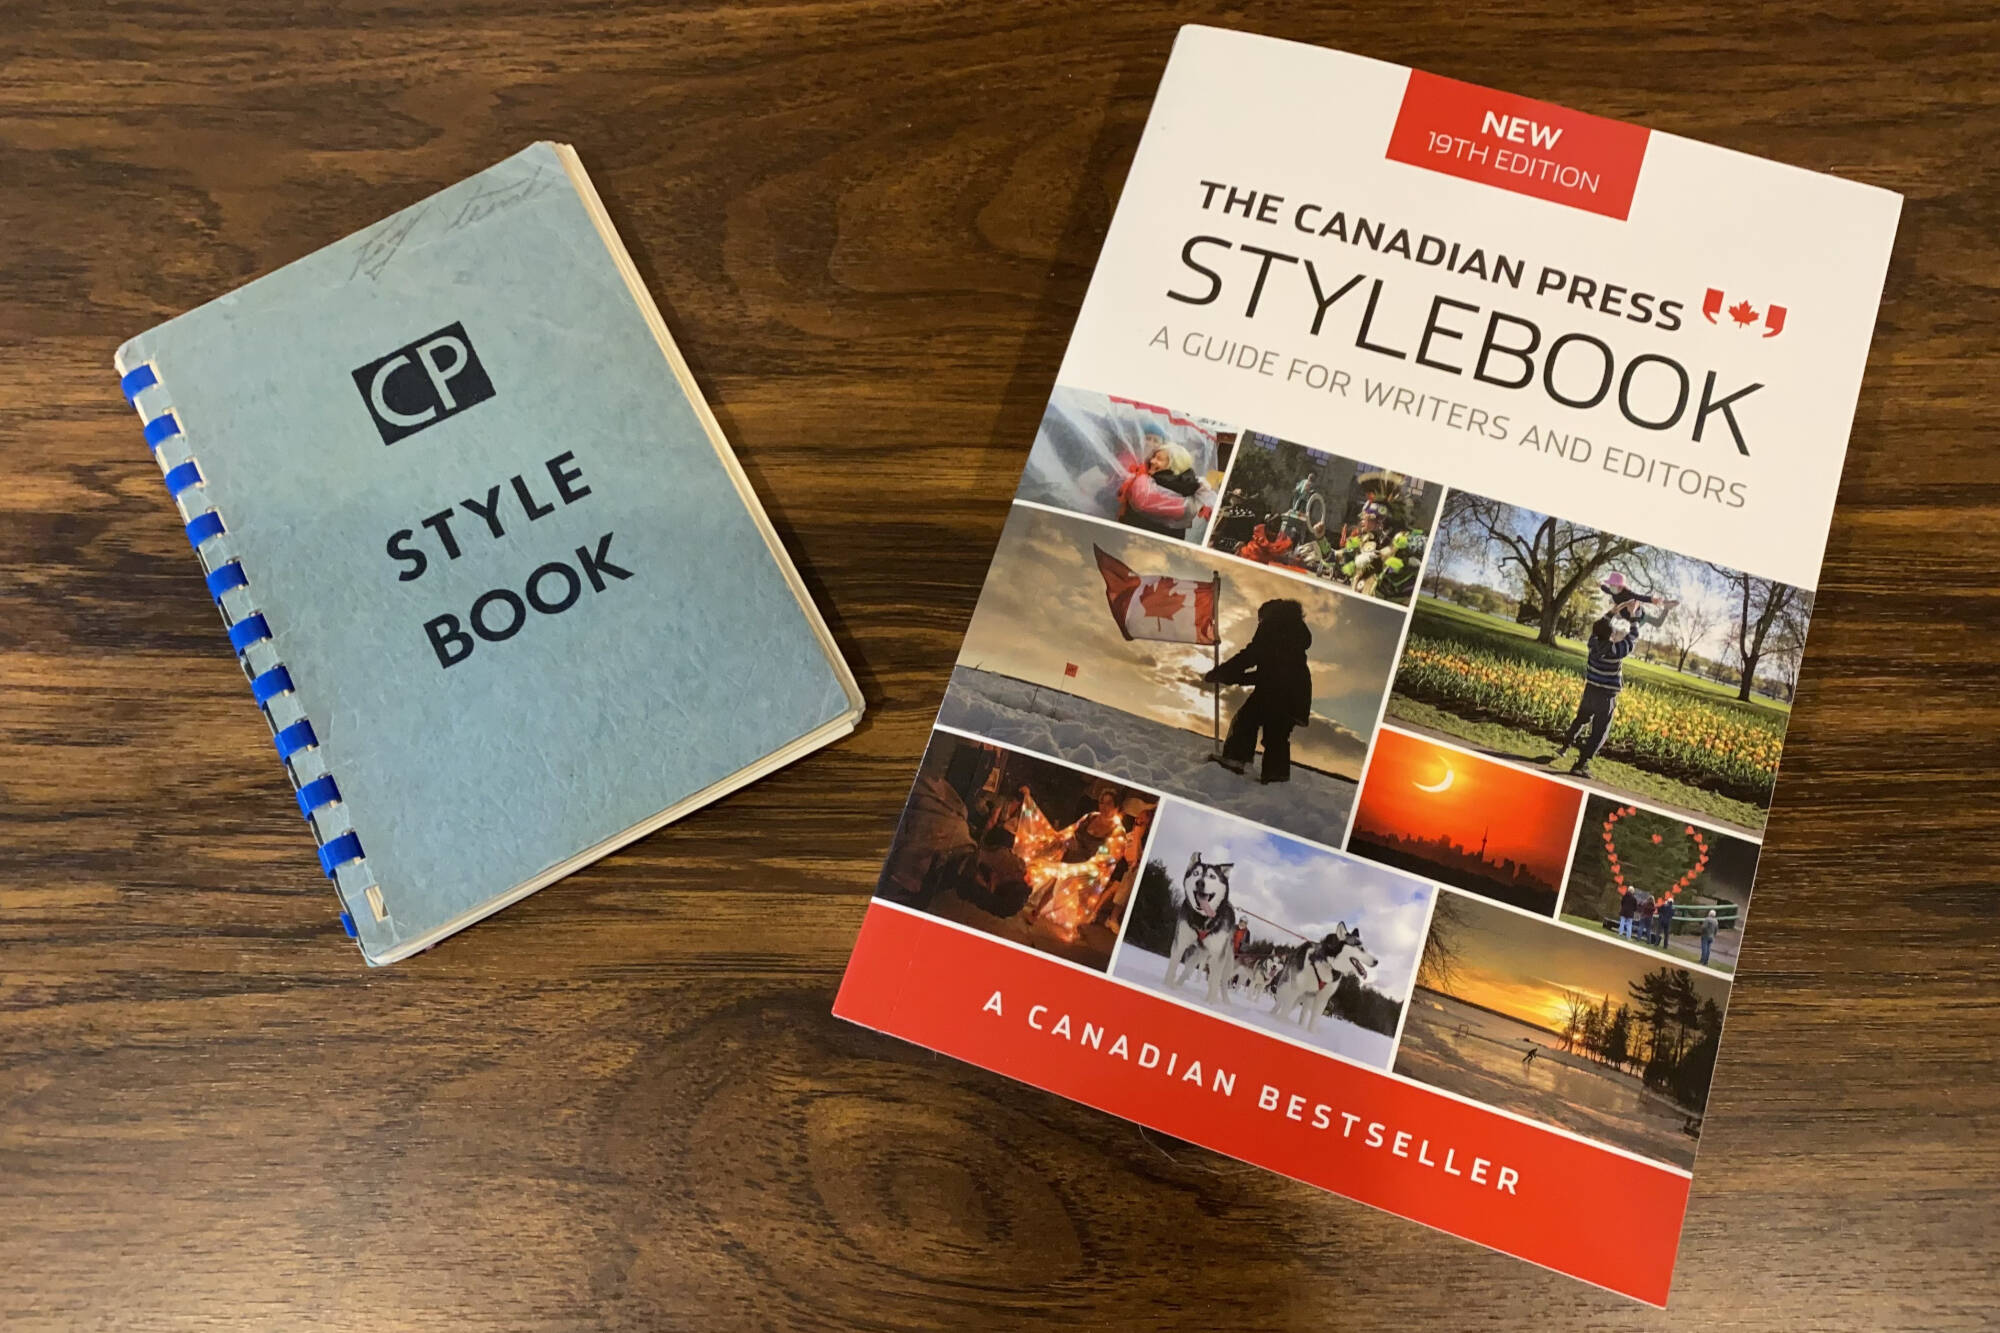 At left is the CP Style Book from 1957. At right is the 19th edition of the Canadian Press Stylebook from 2021. Canadian Press style is used by most English-language newspapers and media outlets in Canada. While details have changed, the principles in these books have remained consistent. (John Arendt - Summerland Review)